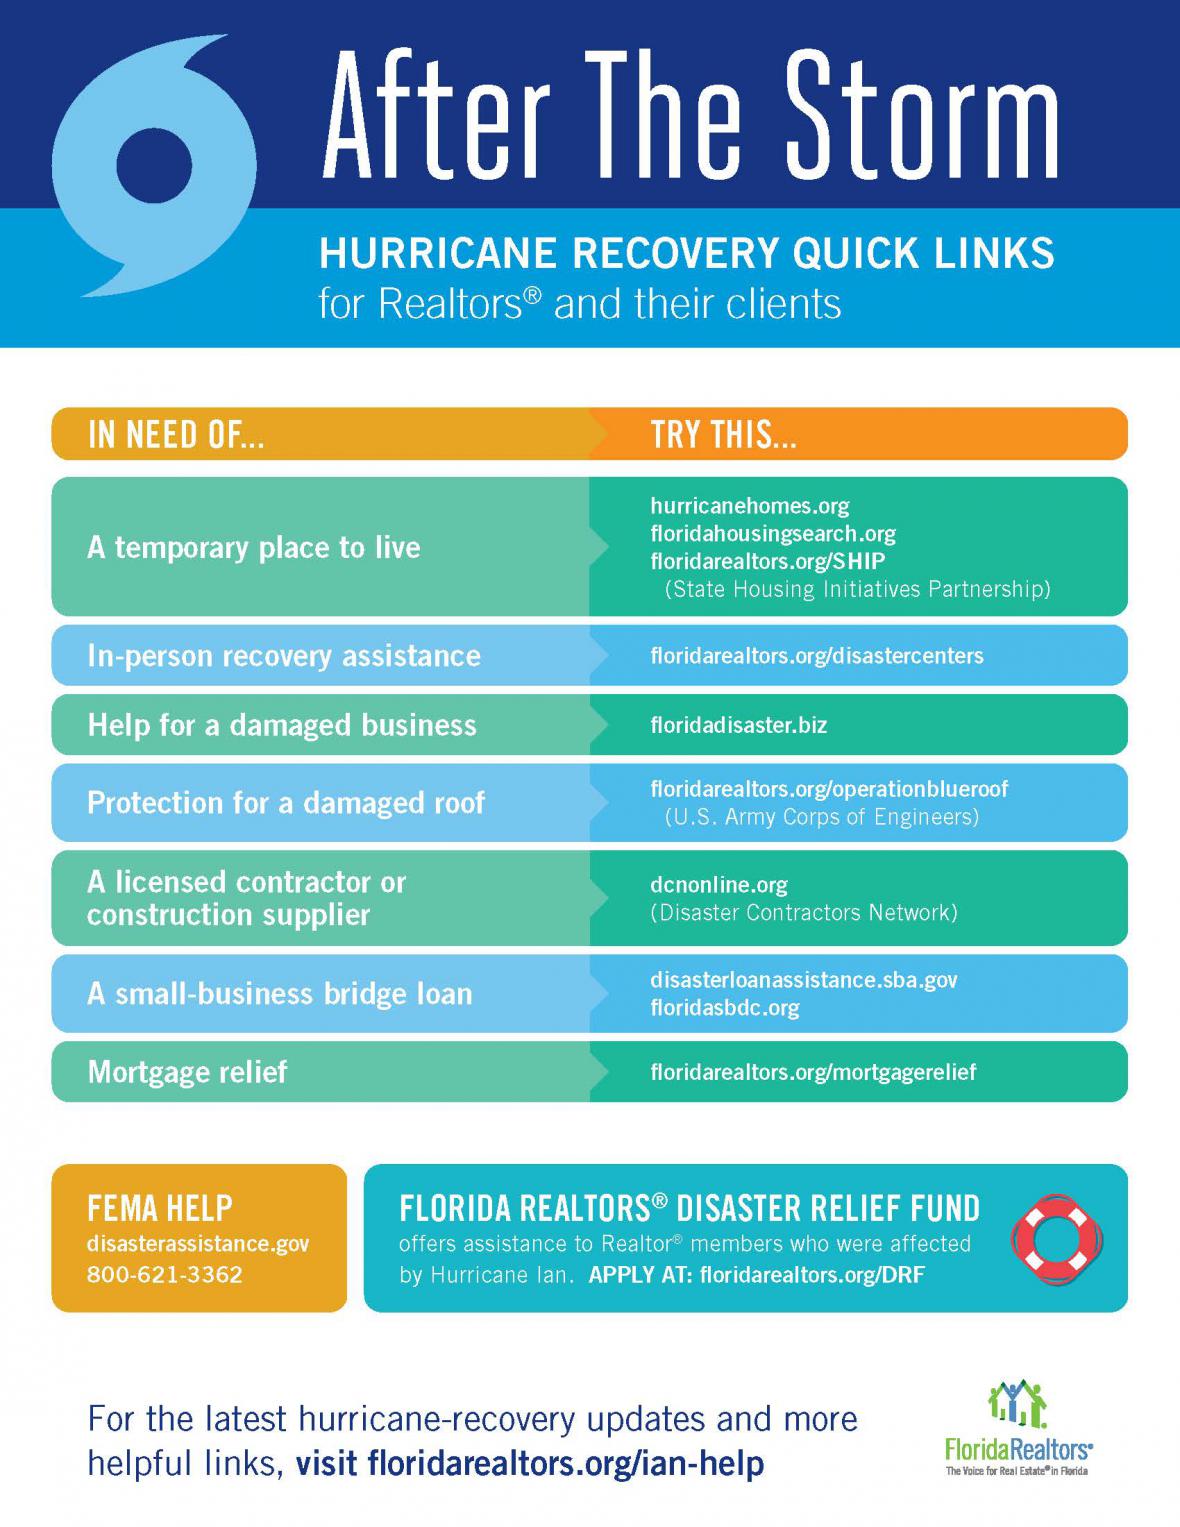 Hurricane Recovery Quick Links infographic